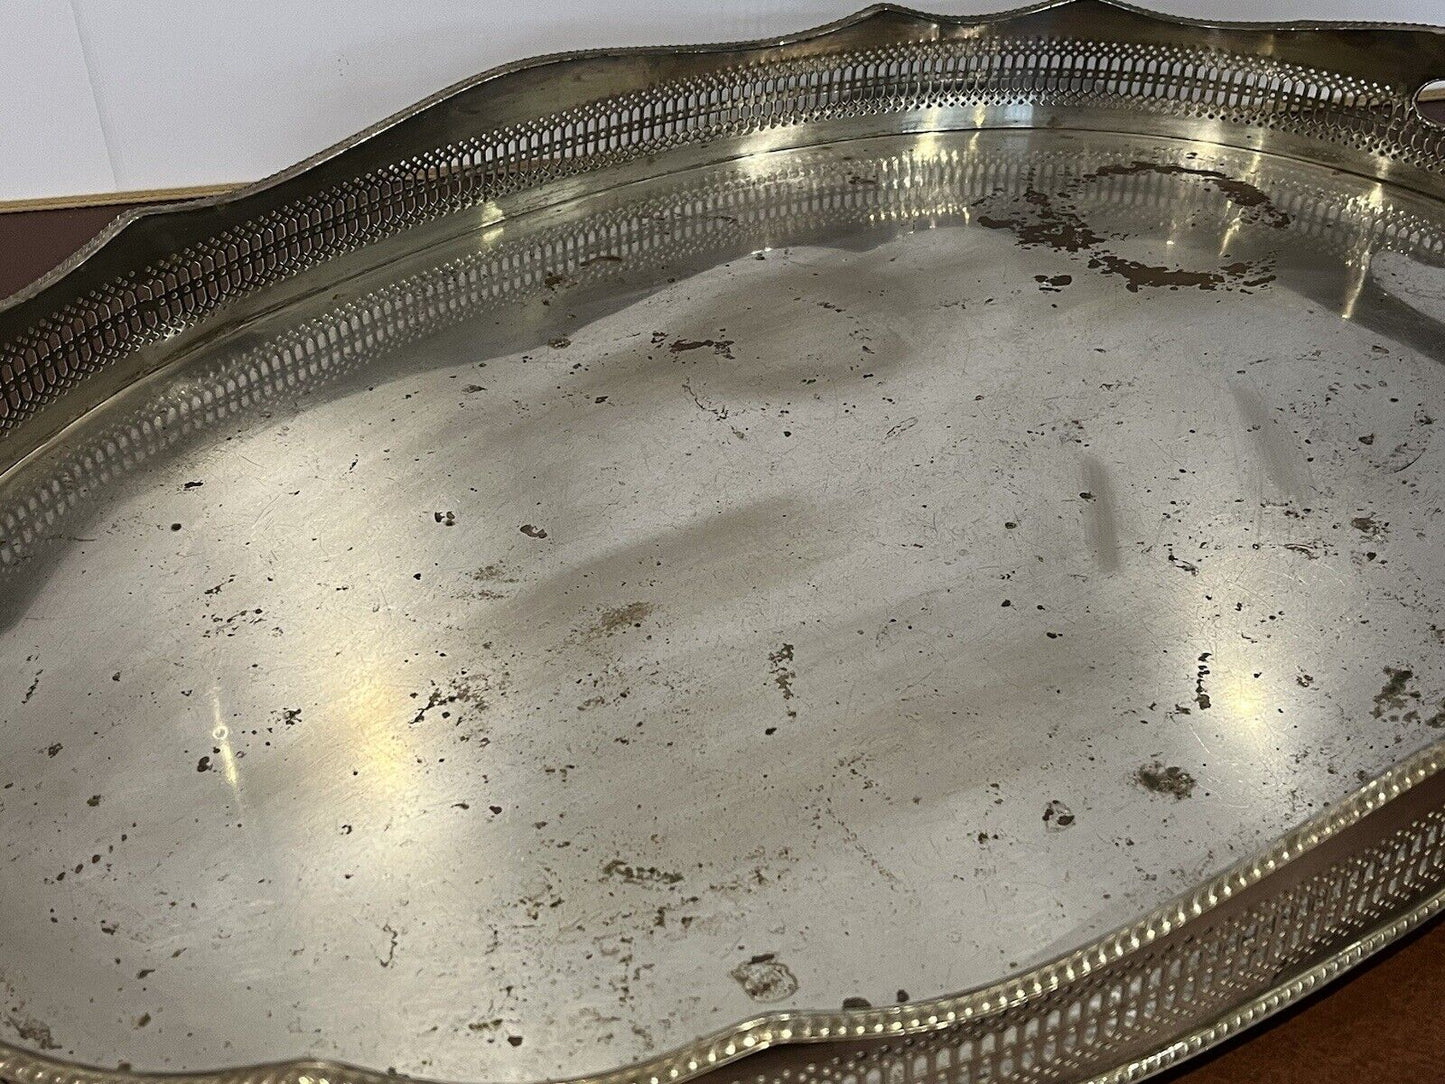 Huge English Silver Plate Tray